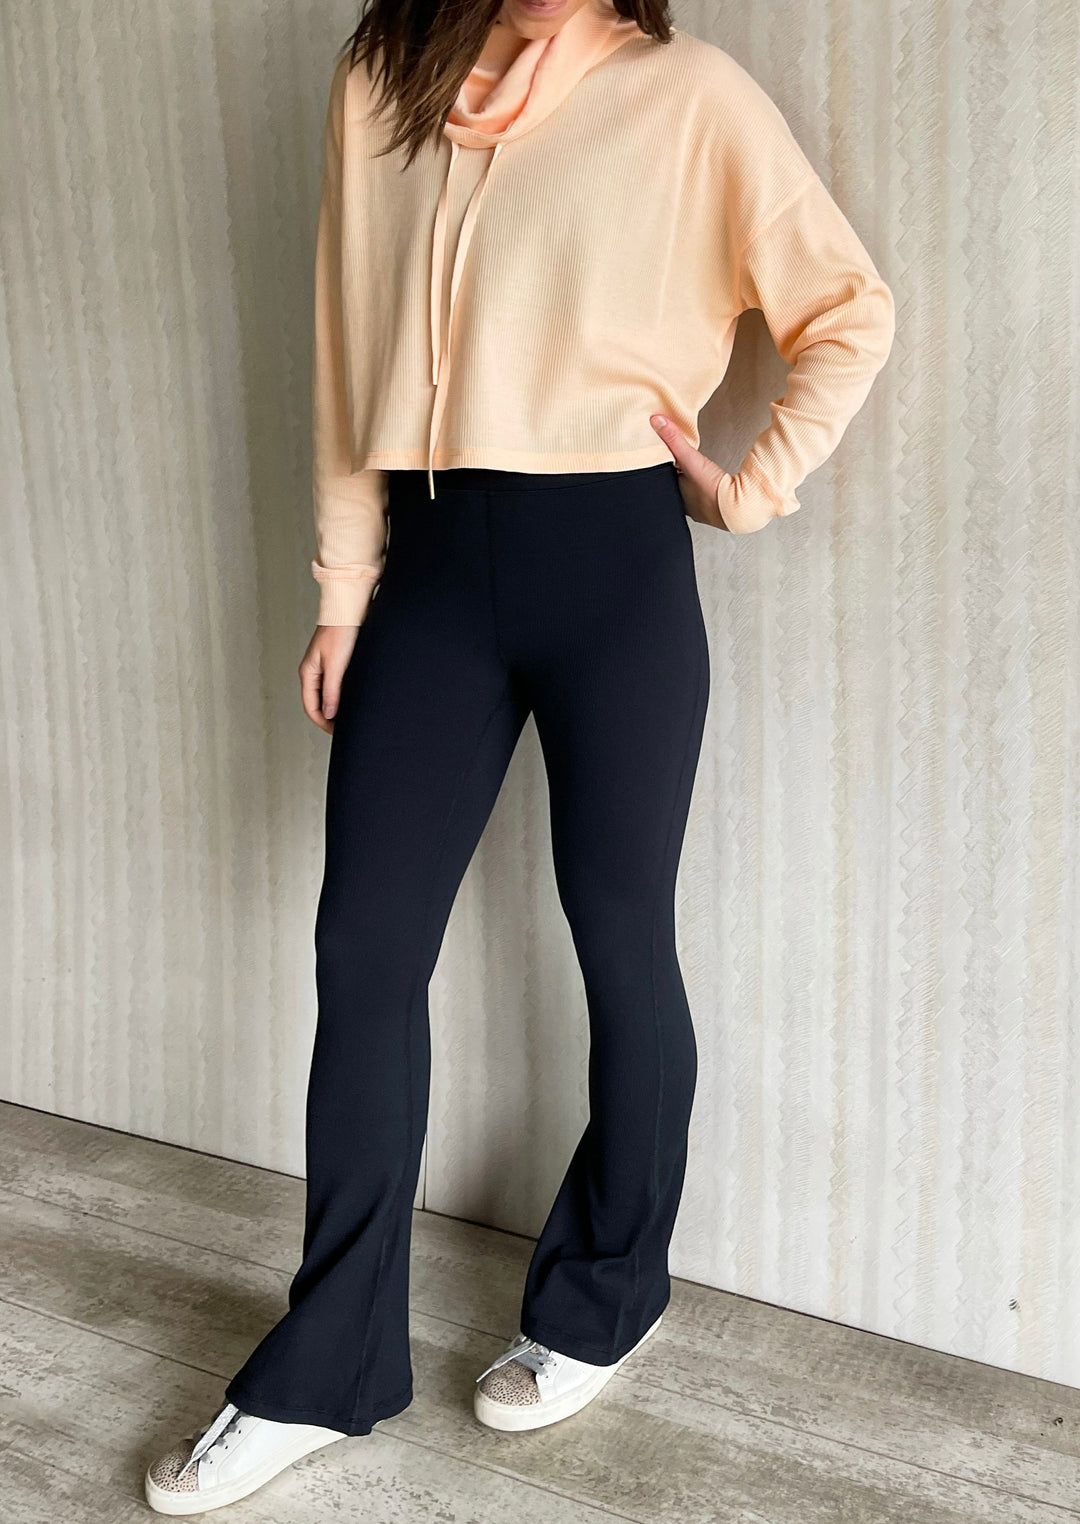 Women's Black Flare Leggings with ribbed material. High-waisted.